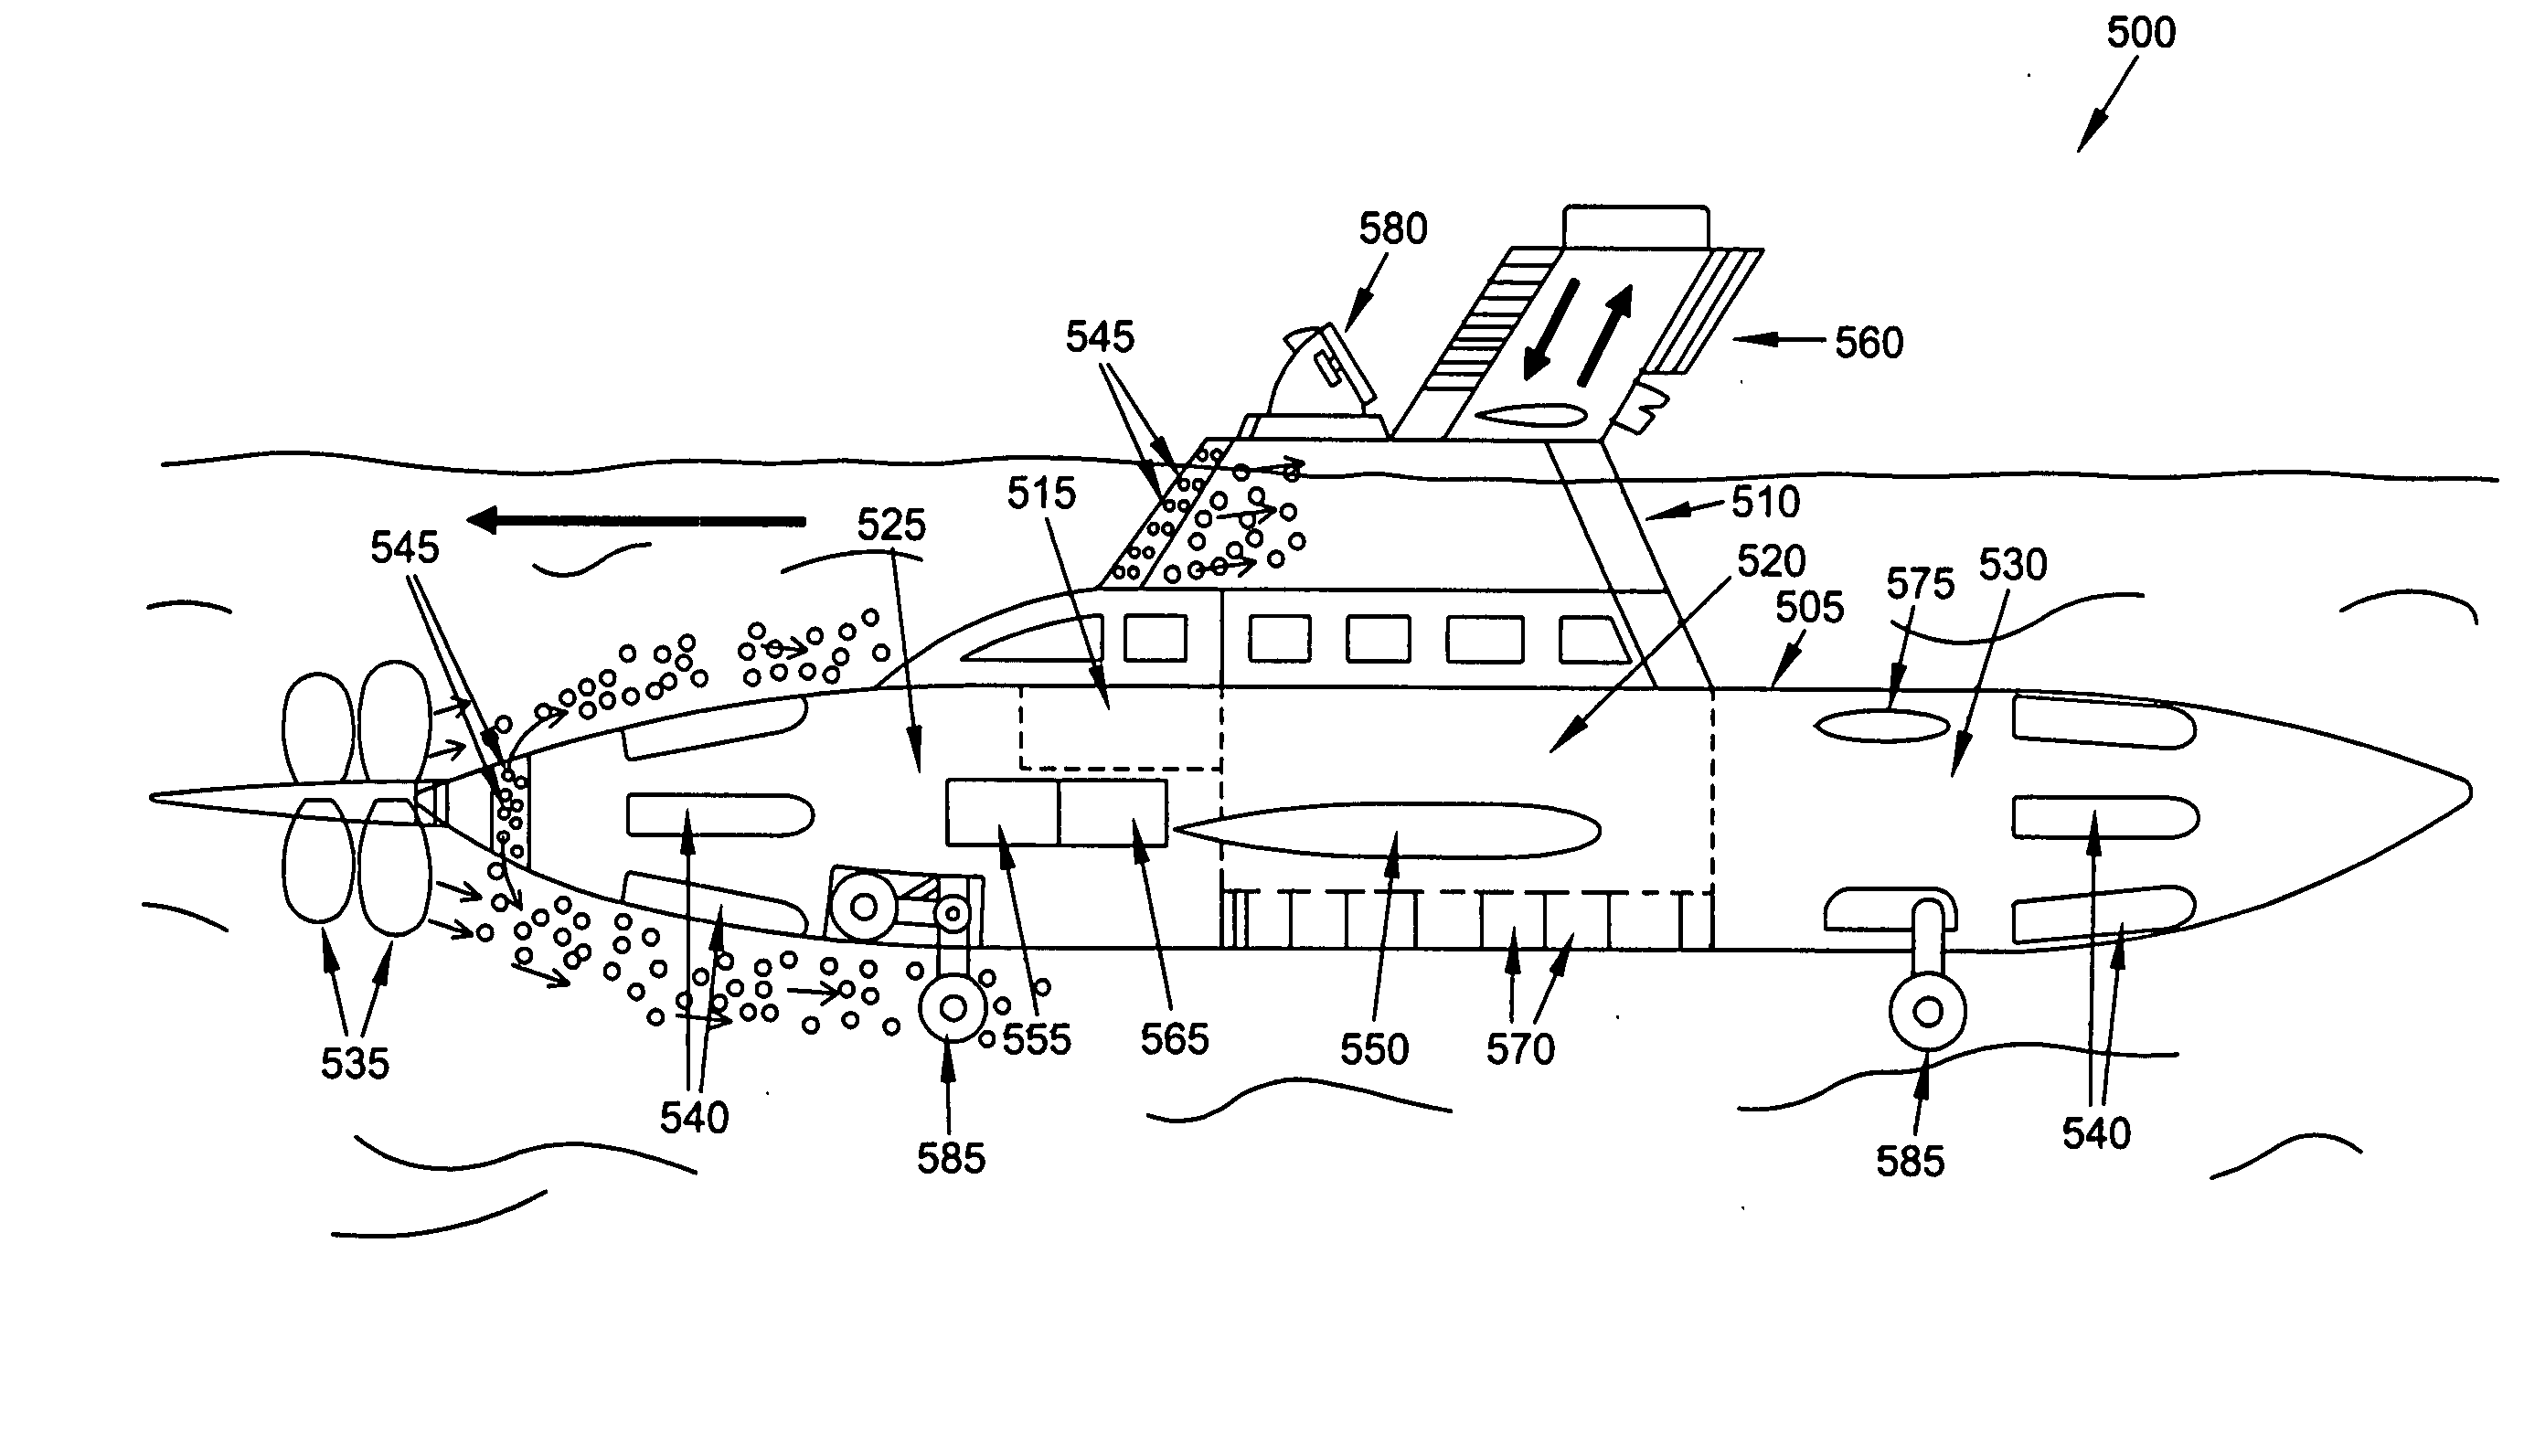 High speed surface craft and submersible vehicle